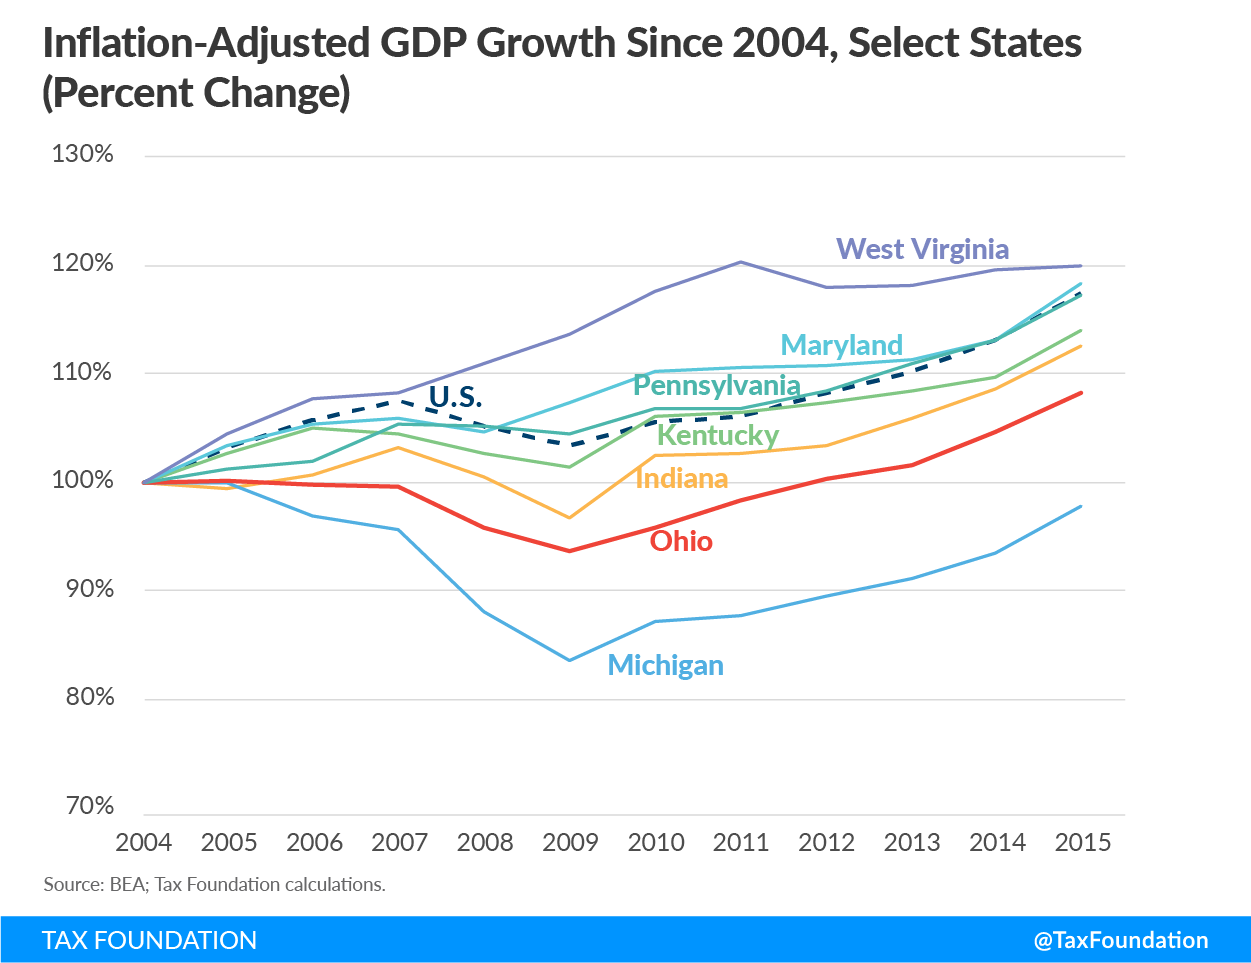 Ohio CAT Inflation-Adjusted GDP Growth Since 2004, Select States (Percent Change)